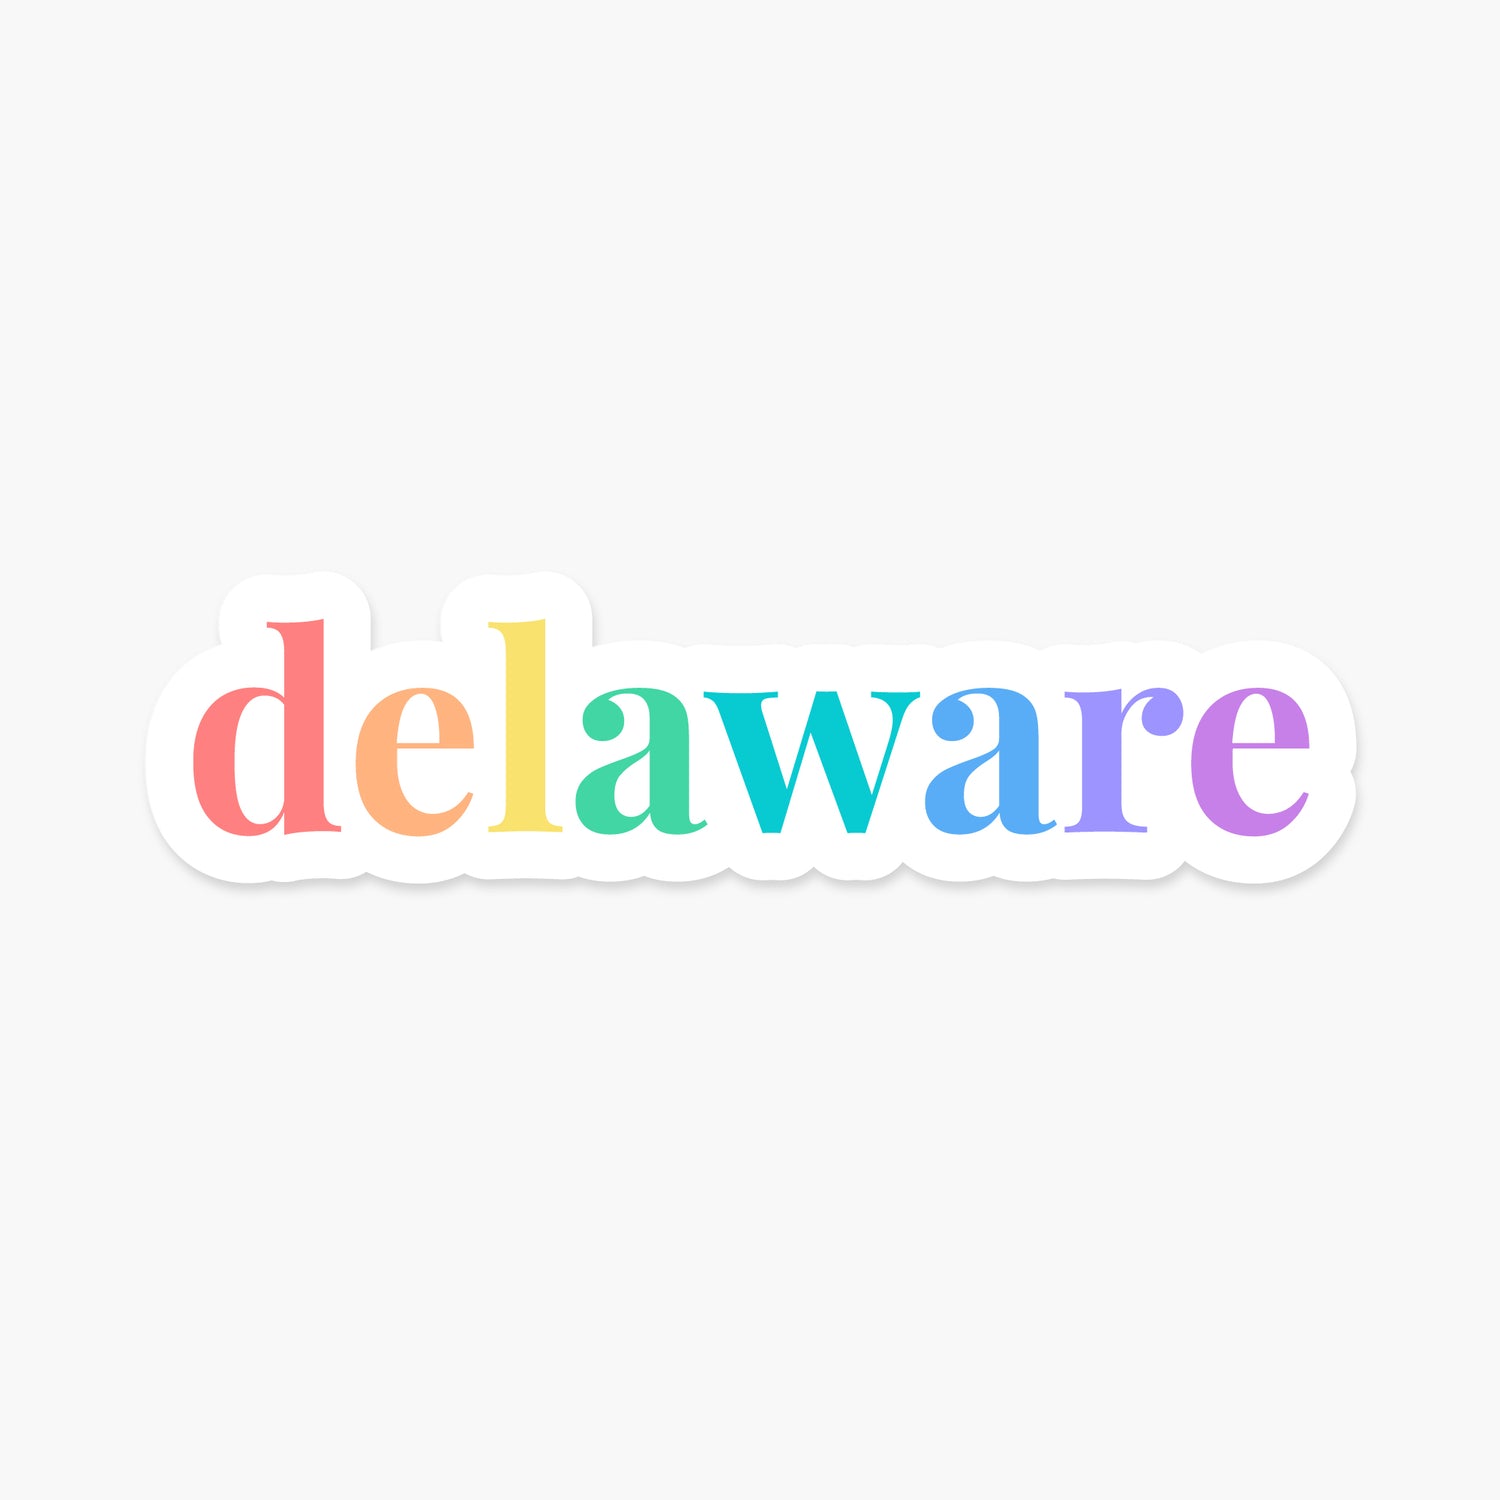 Delaware US State - Everyday Sticker | Footnotes Paper